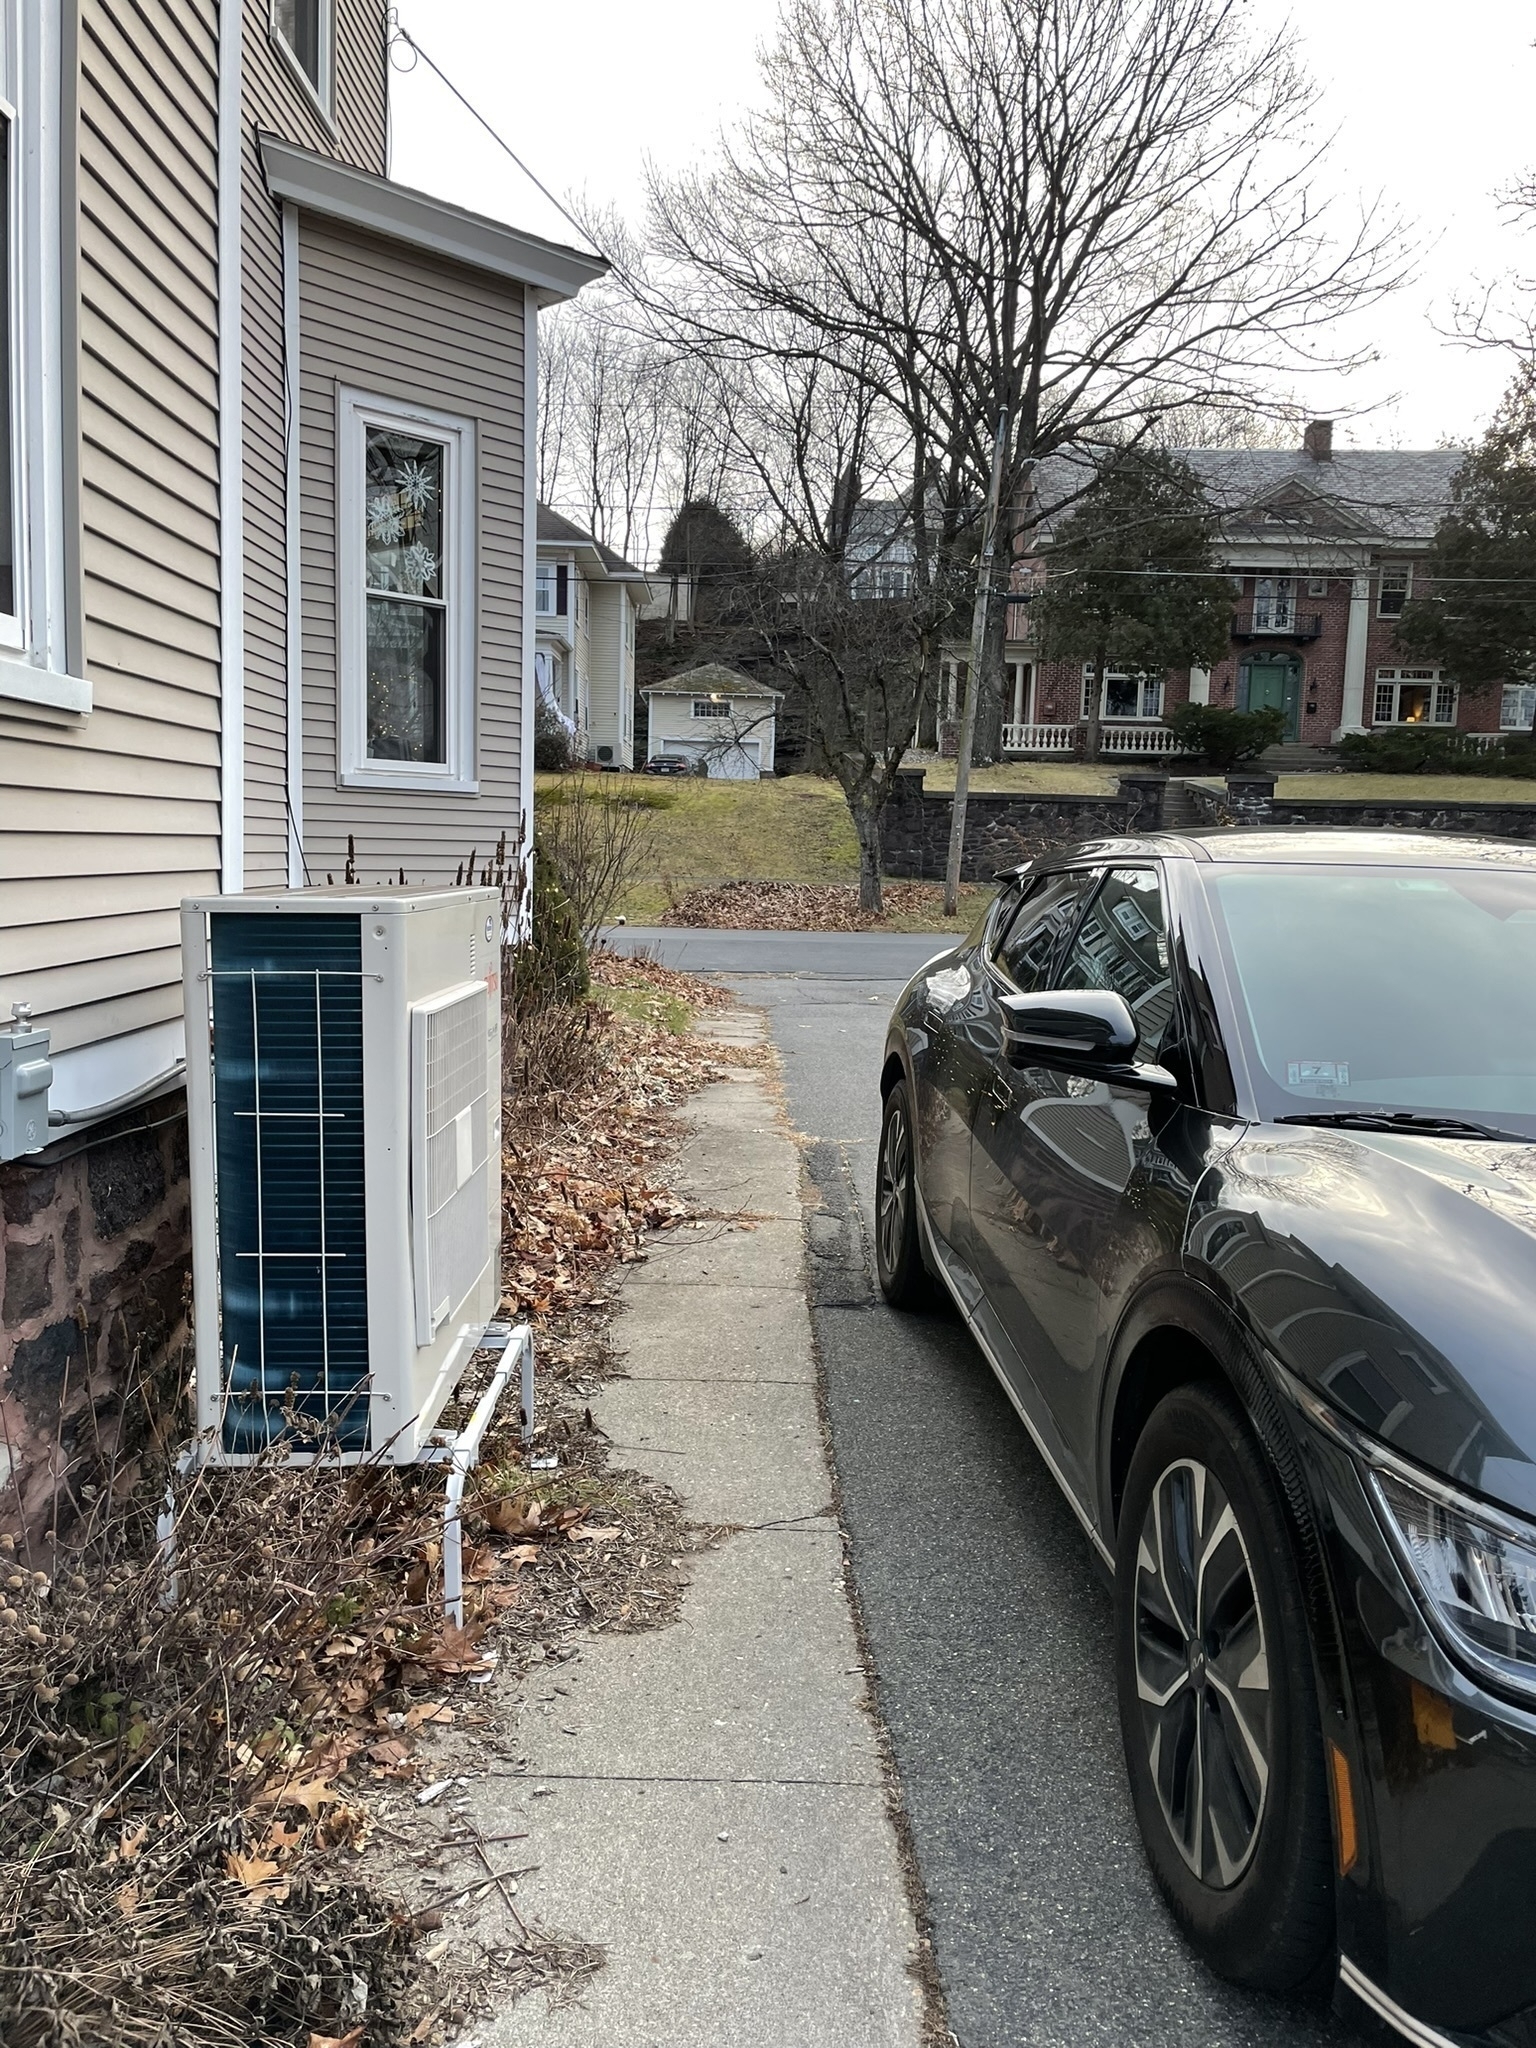 Mini split condenser next to a house and facing a car parked in the driveway